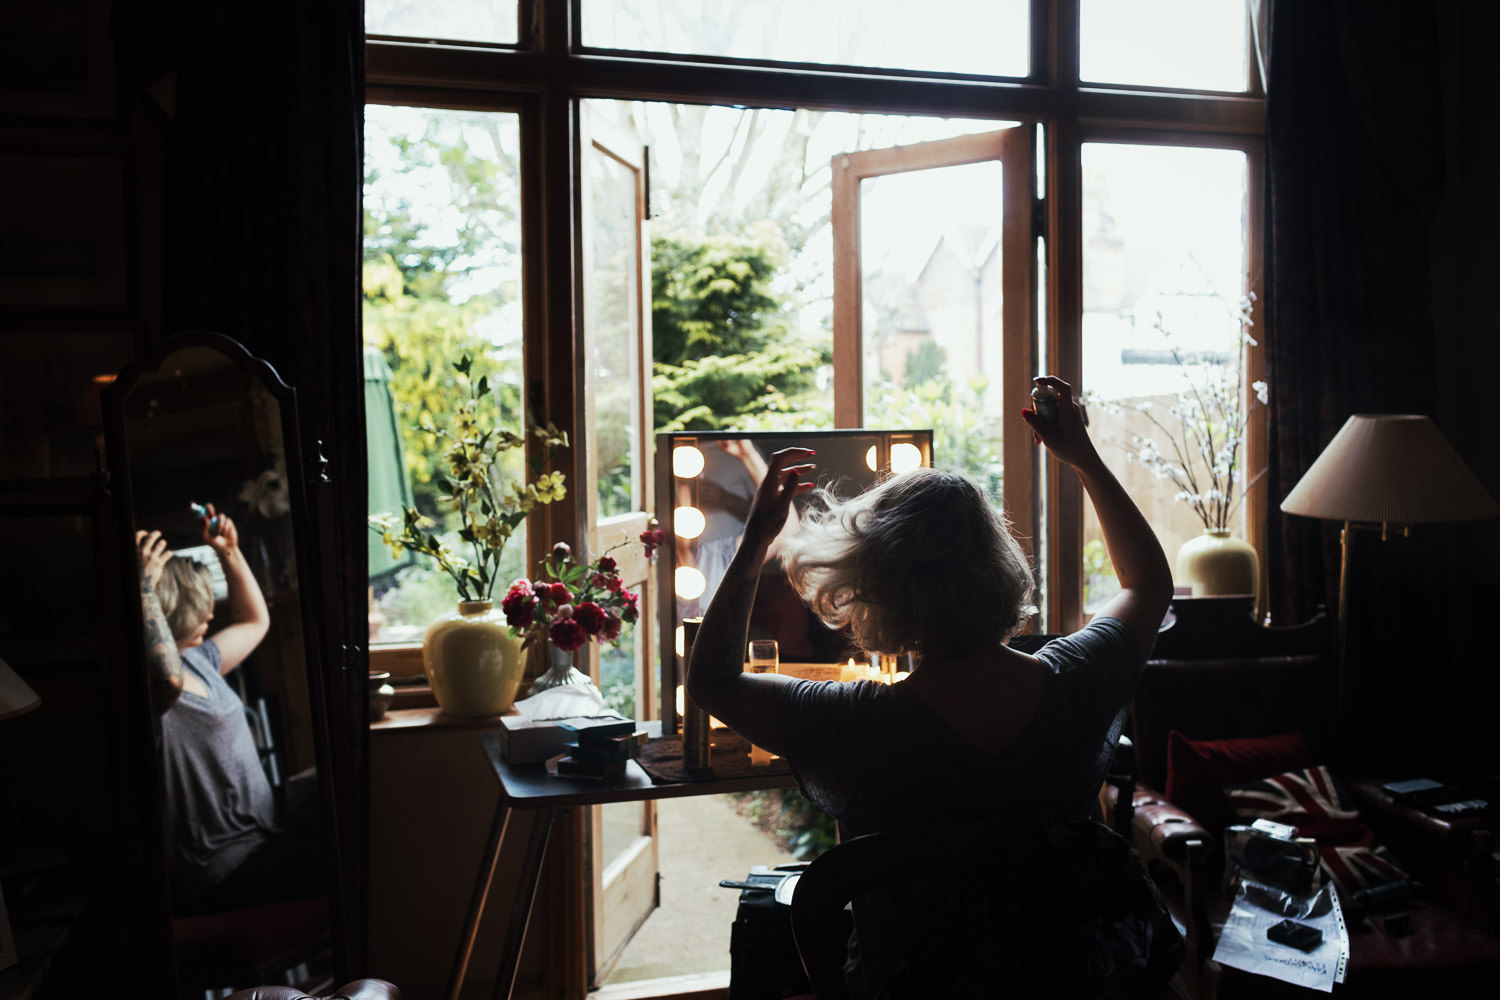 A blonde woman sitting at a dressing table spraying her hair, getting ready for a wedding. The doors to the room are open to the garden. London wedding photography.